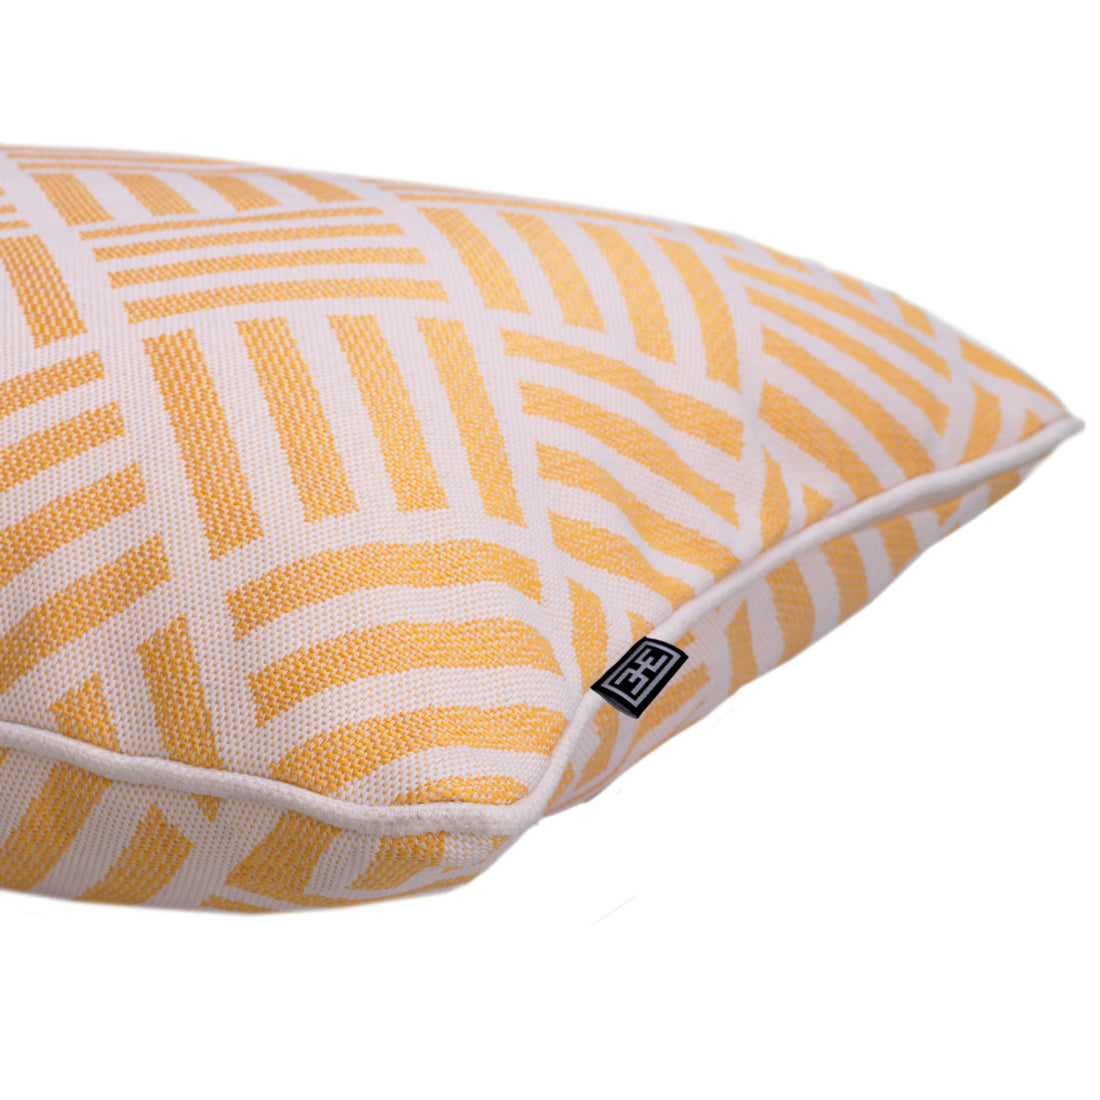 Cushion Sonel L yellow with white piping